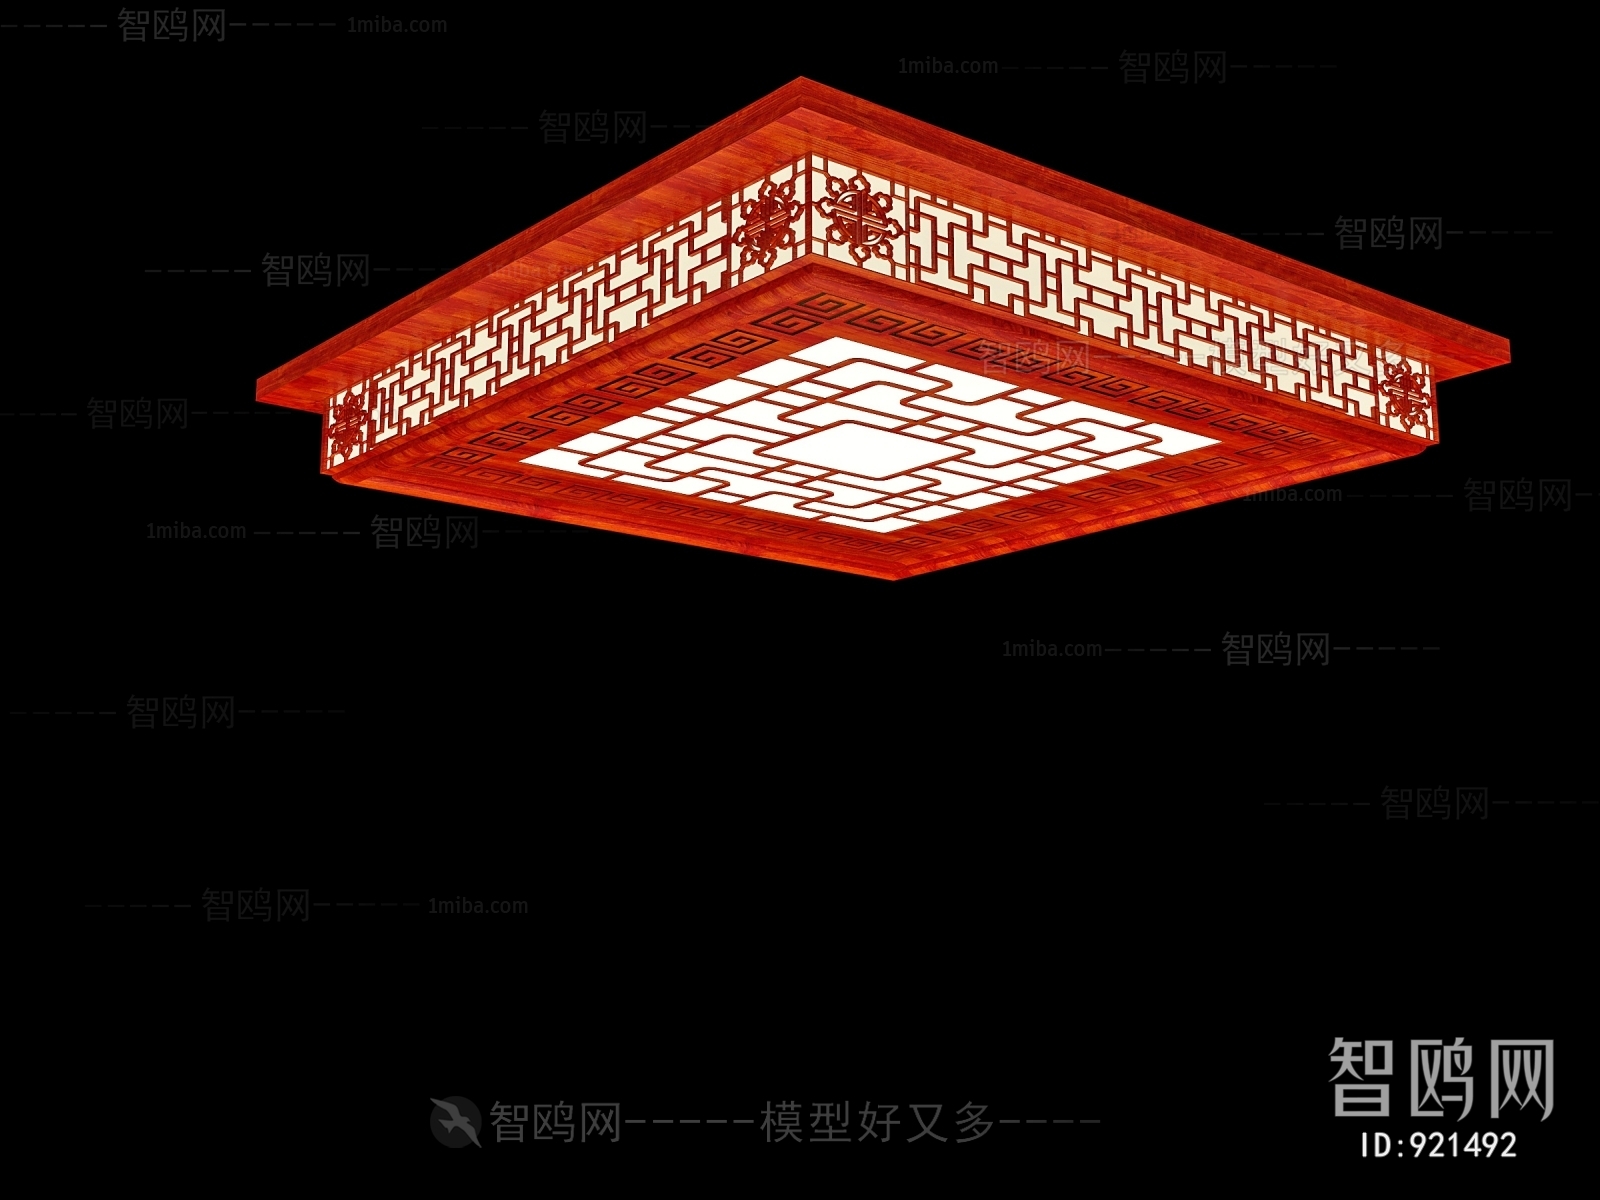 Chinese Style Ceiling Ceiling Lamp